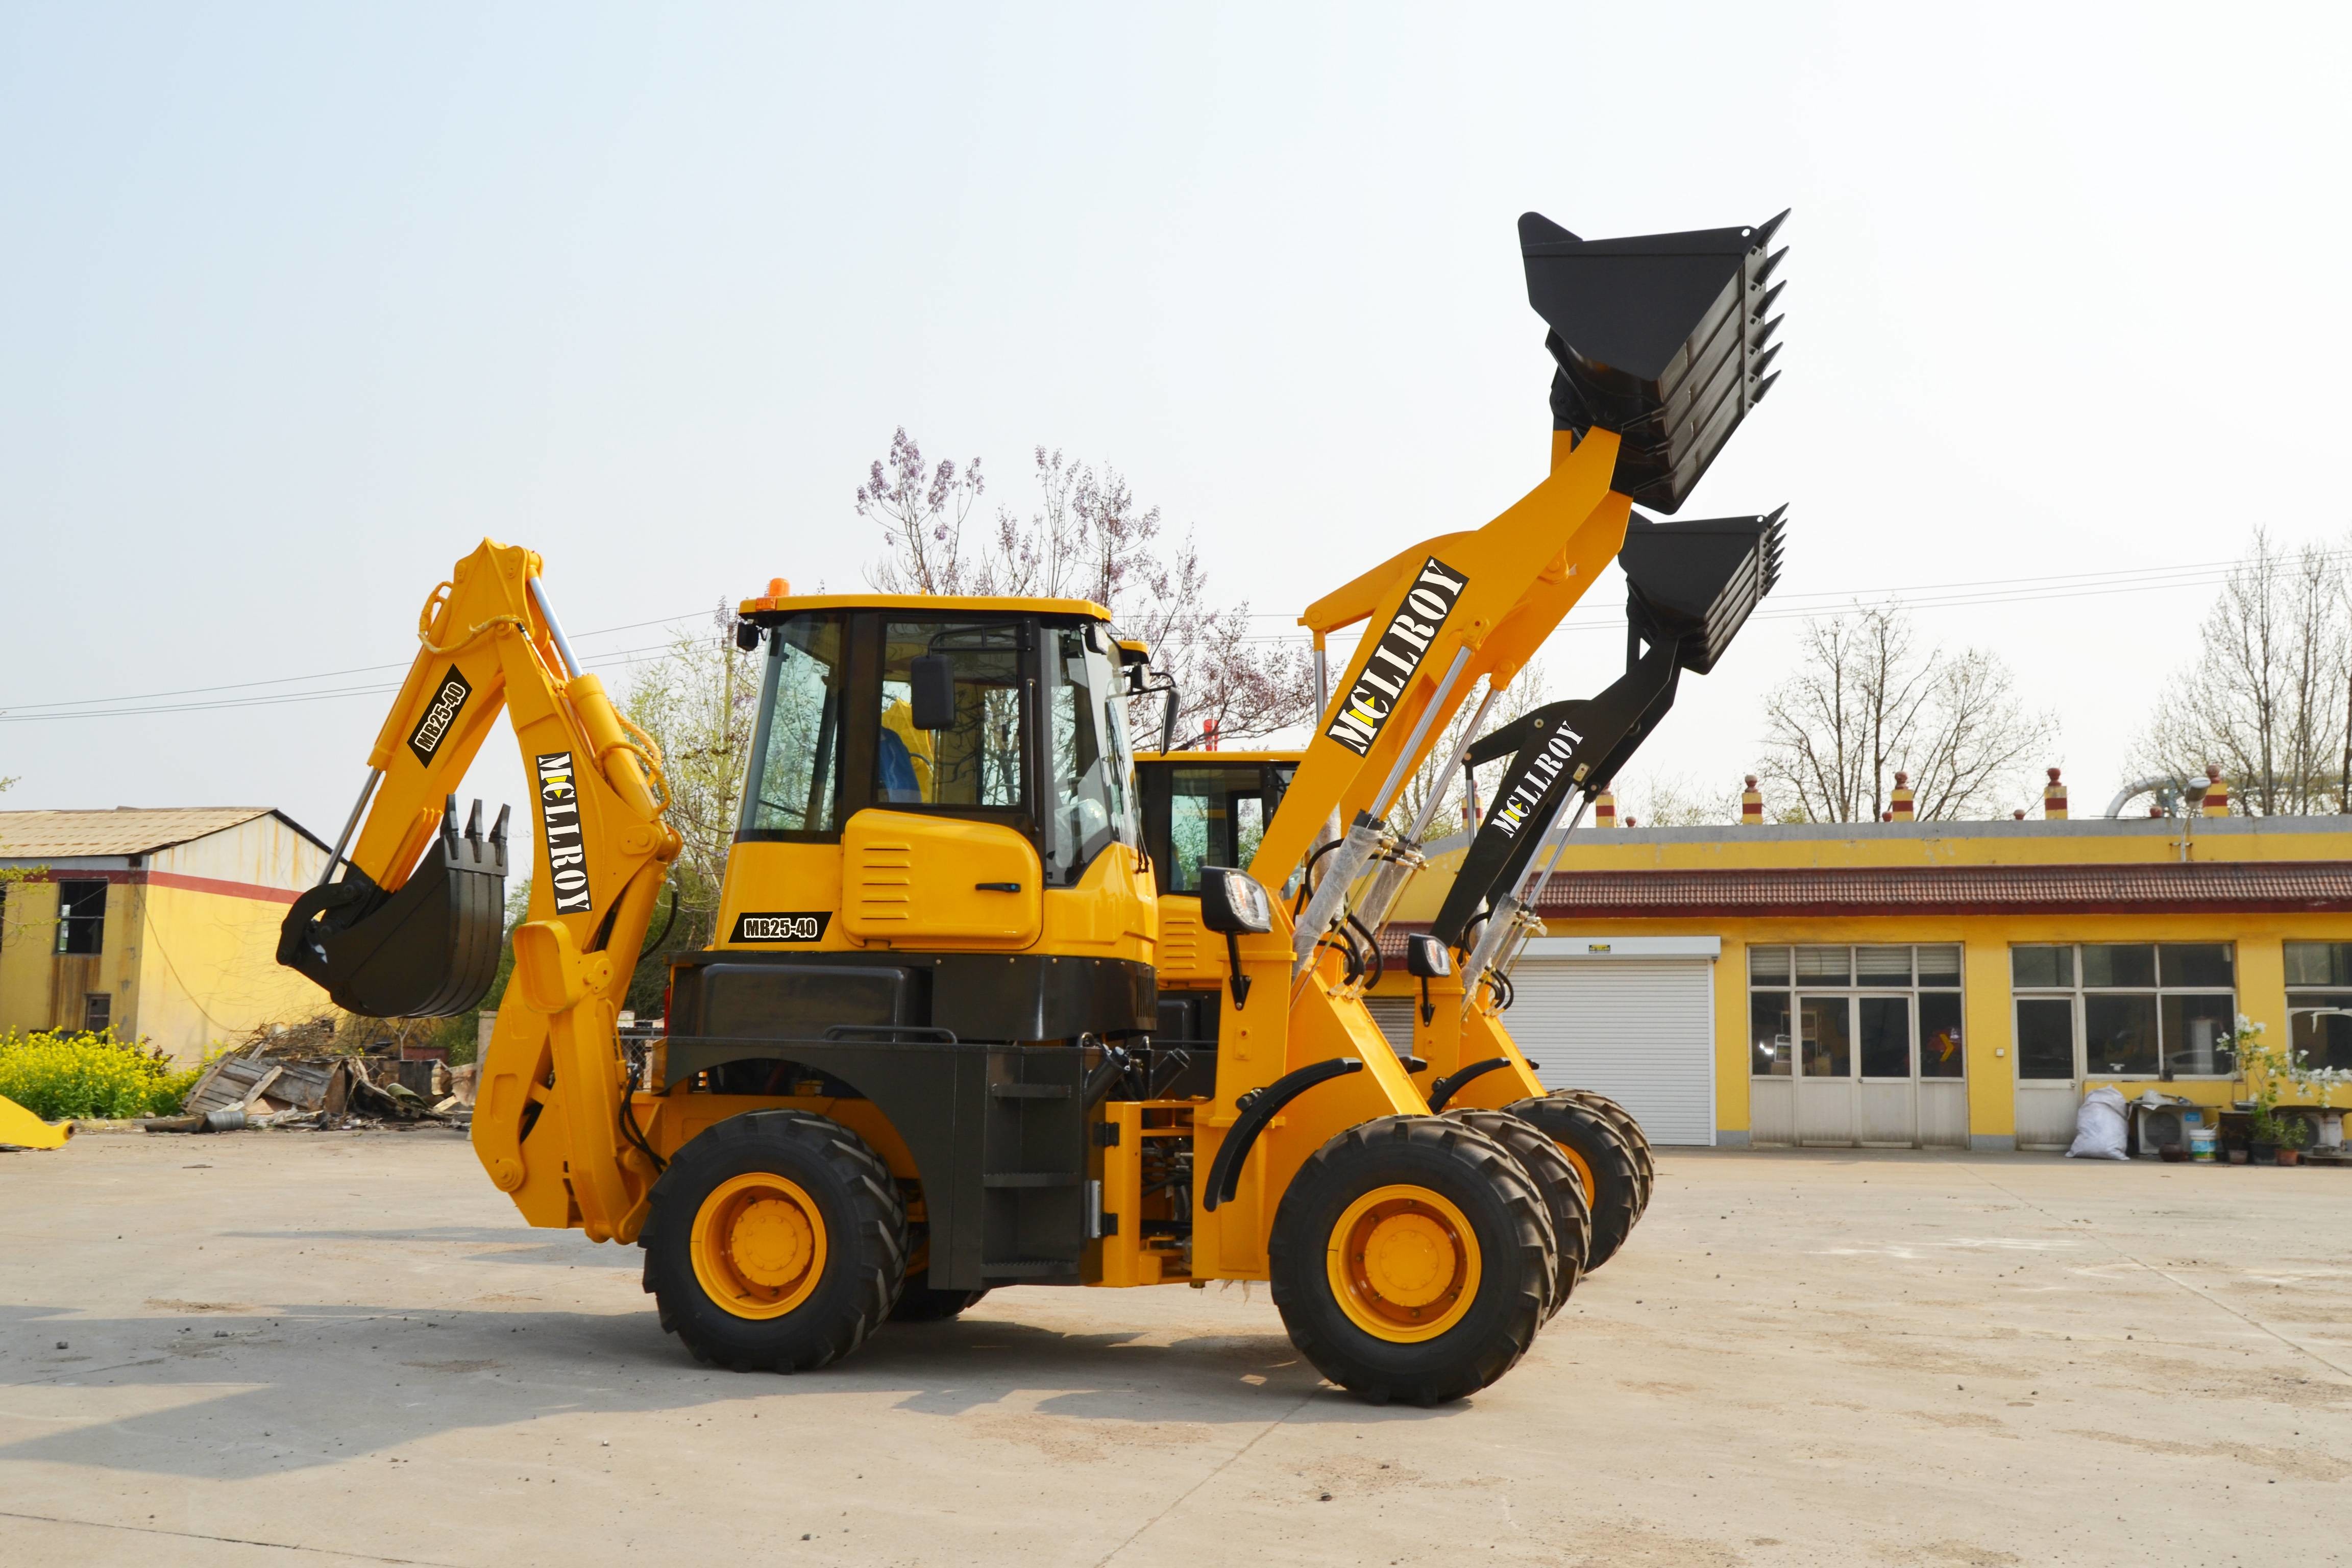 0.25m3 Dig Bucket Small Backhoe Loader MCLLROY MB25-40 With Cummins EPA 4 Tire Eco Engine